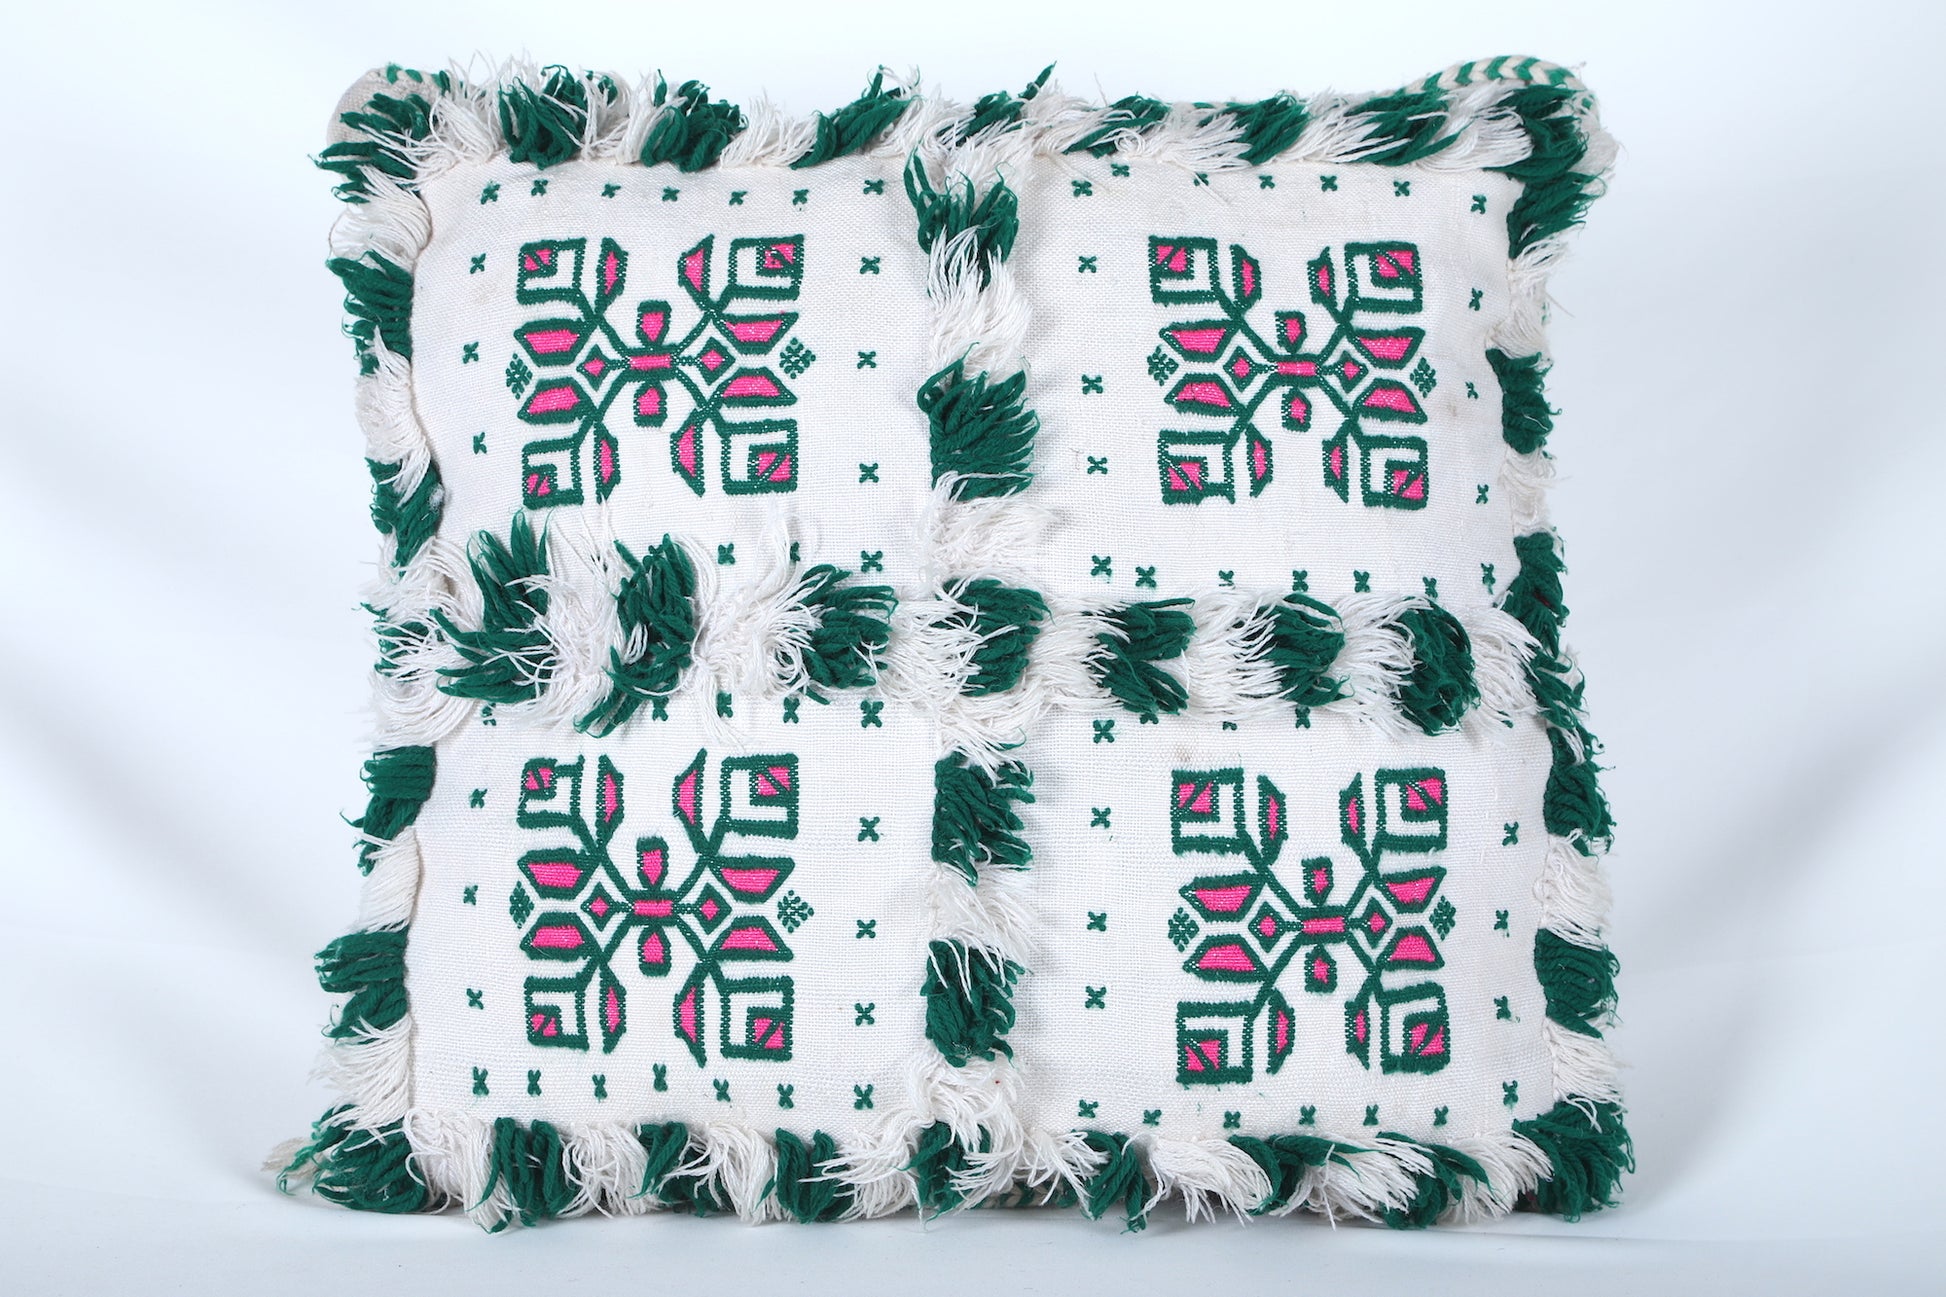 White & Green Moroccan pillow 20.4 INCHES X 20.8 INCHES